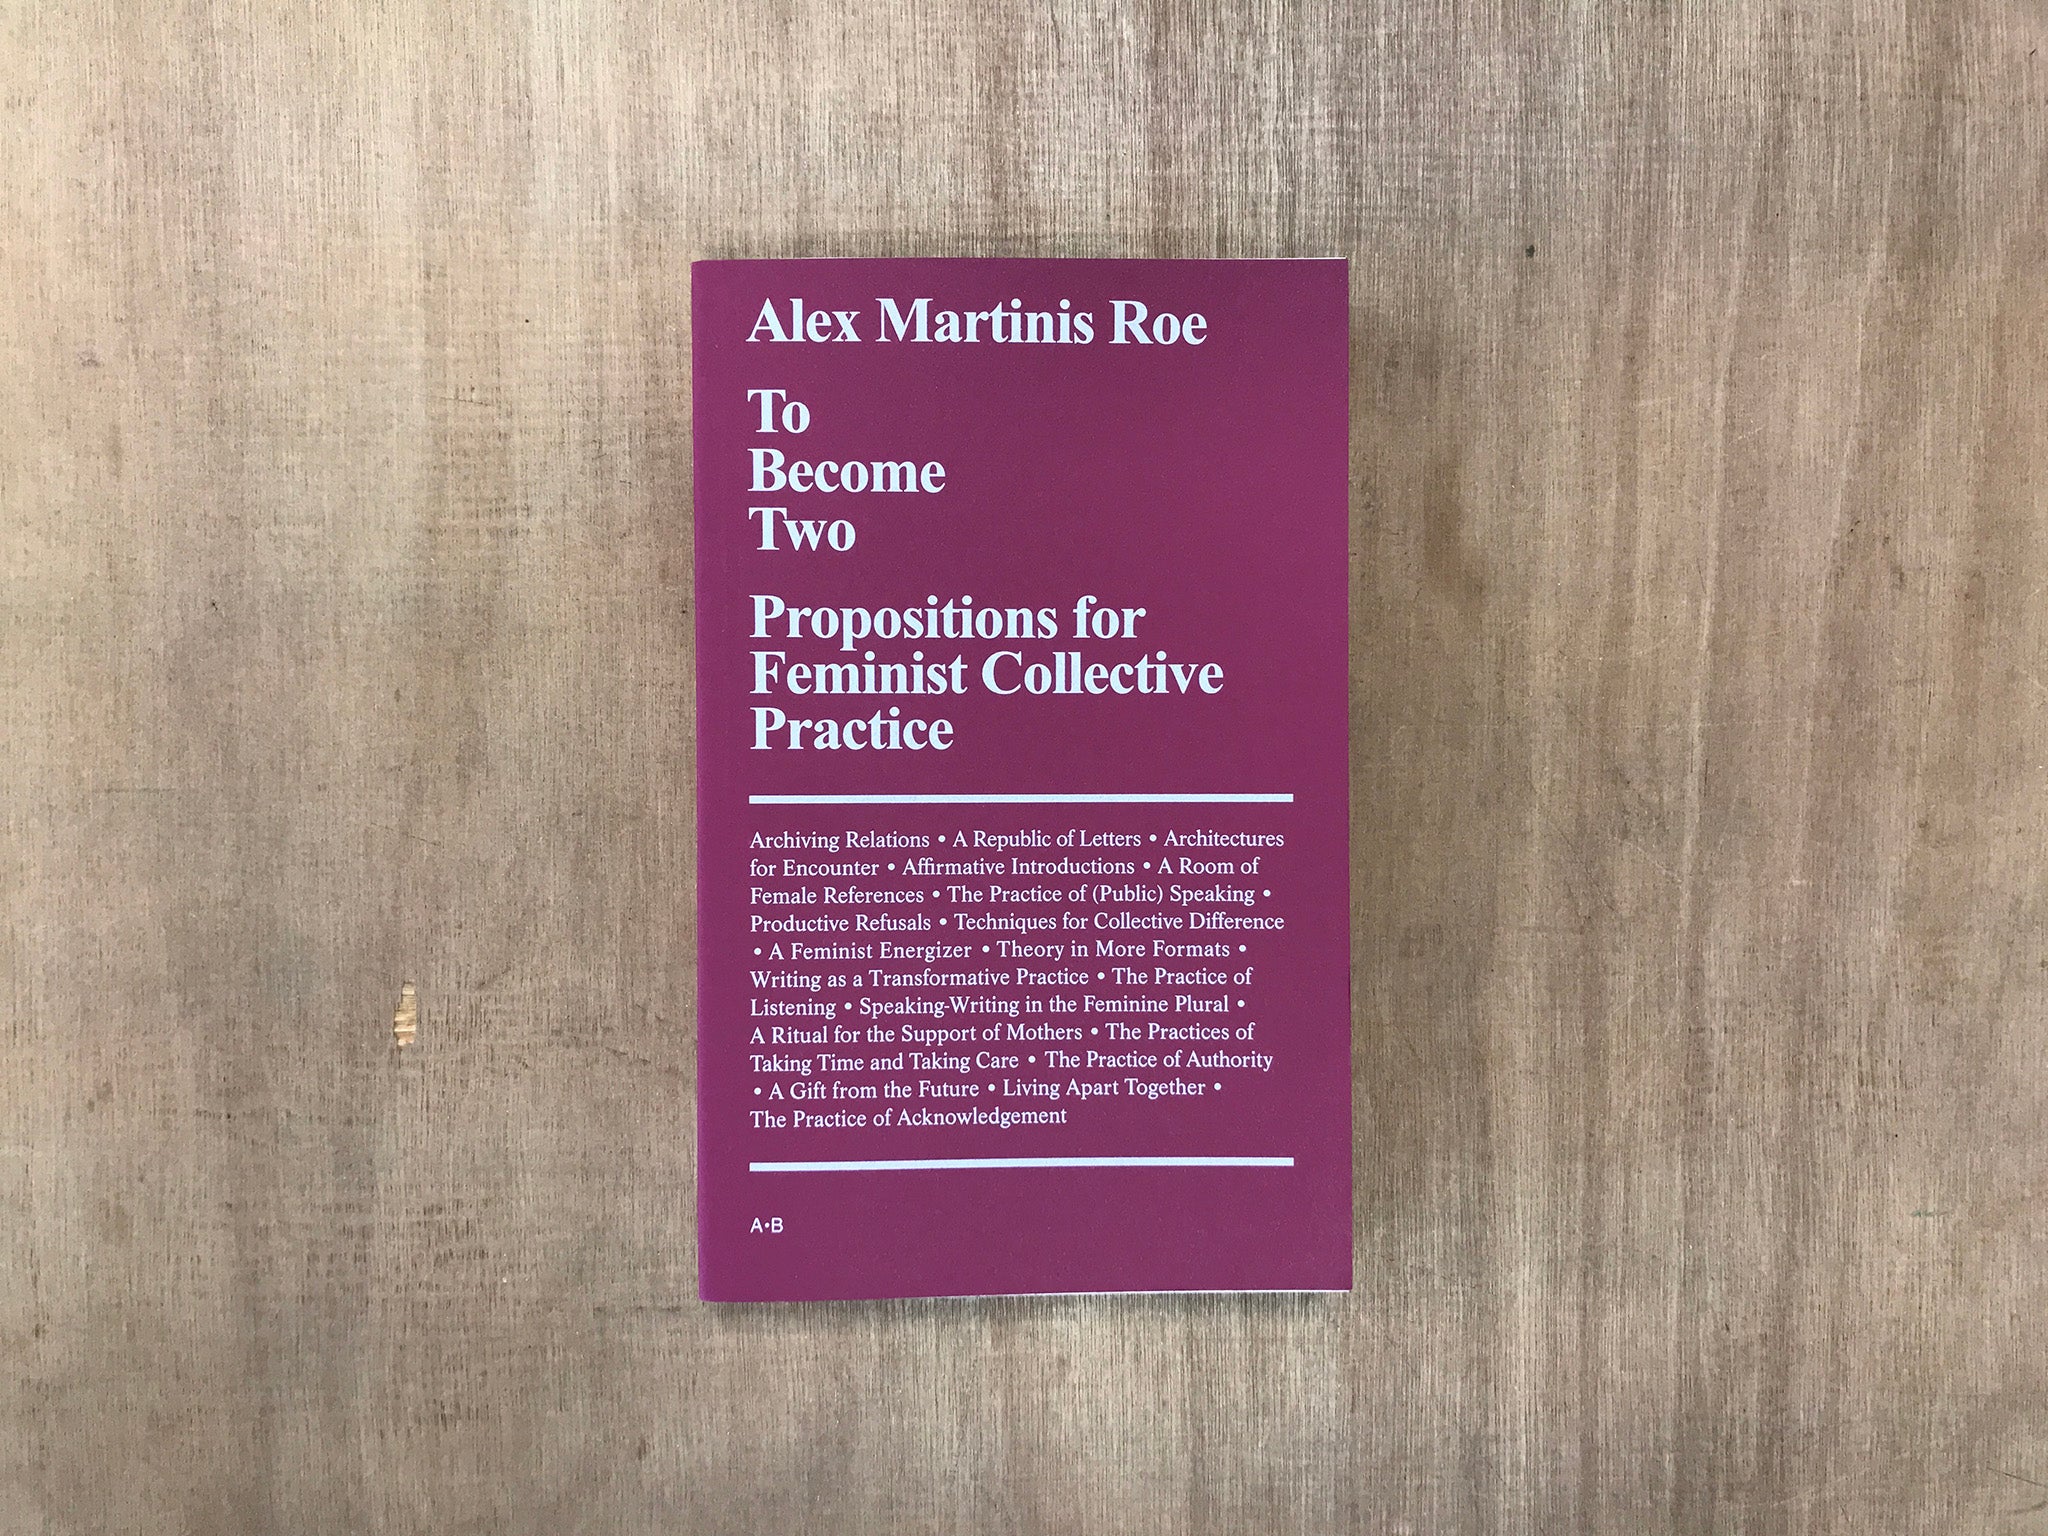 TO BECOME TWO – PROPOSITIONS FOR FEMINIST COLLECTIVE PRACTICE by Alex Martinis Roe